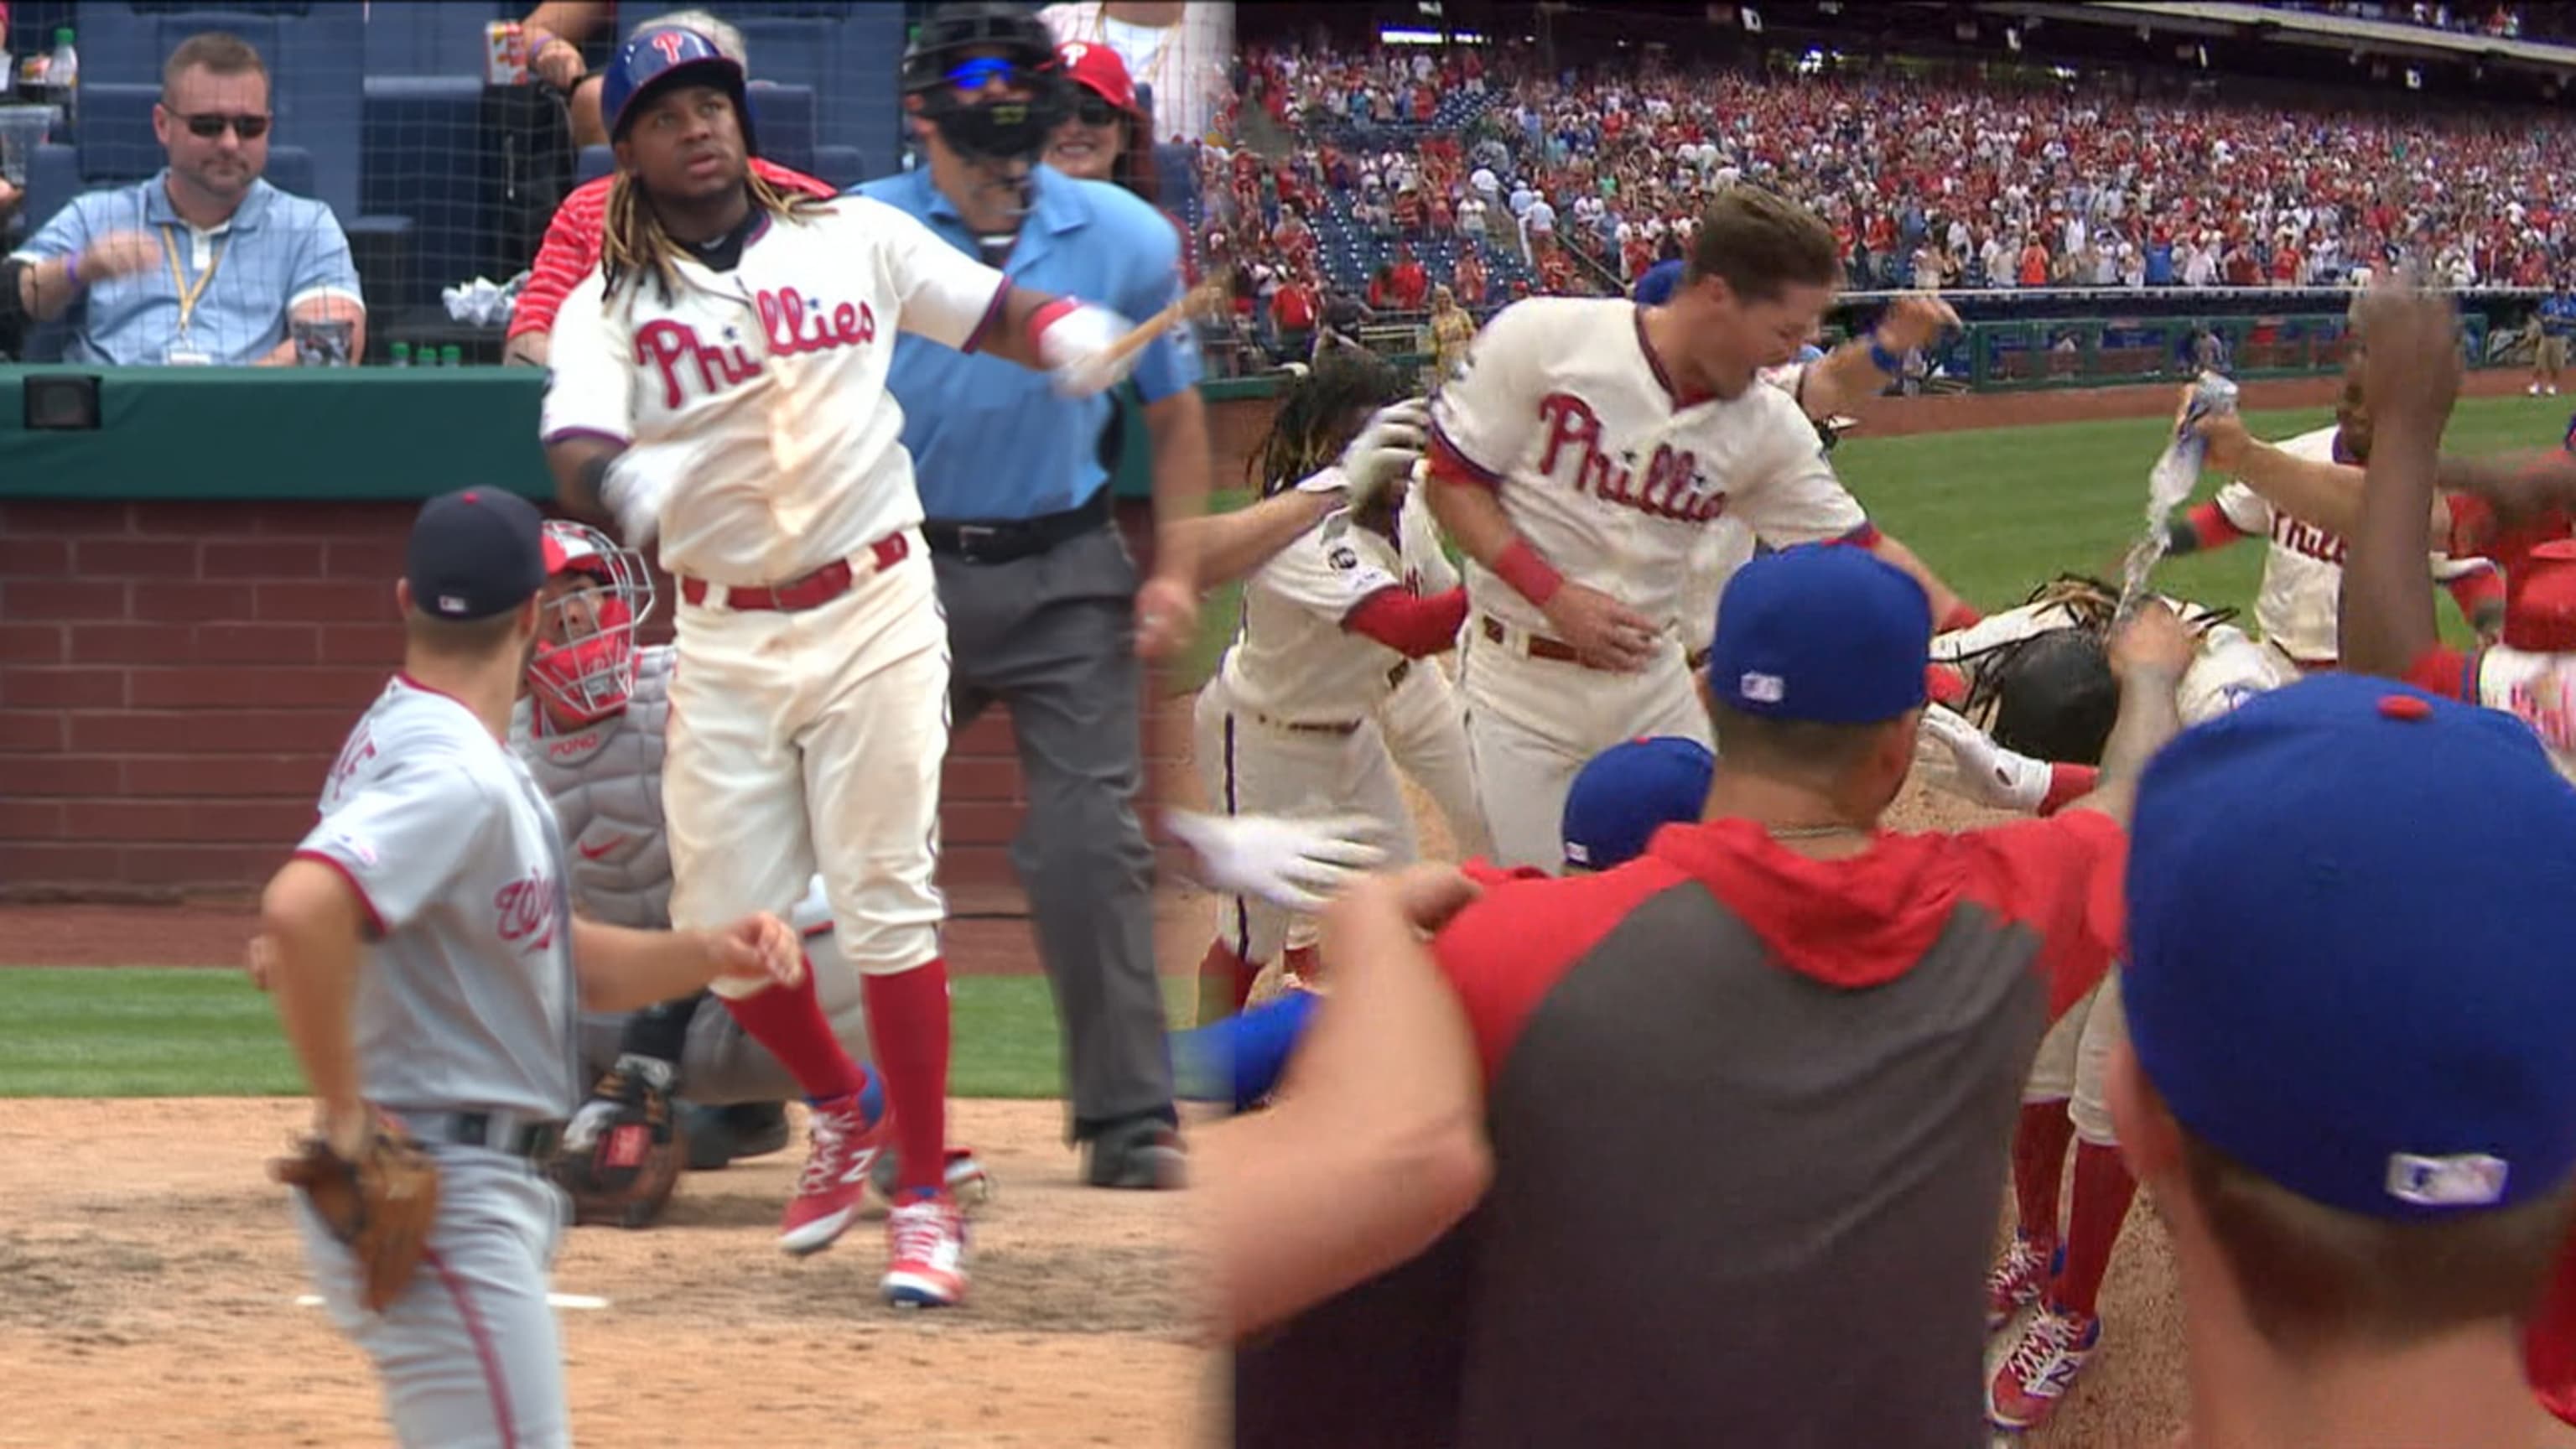 Maikel Franco's walk-off homer gives Phillies win over Marlins to hold  first place in NL East